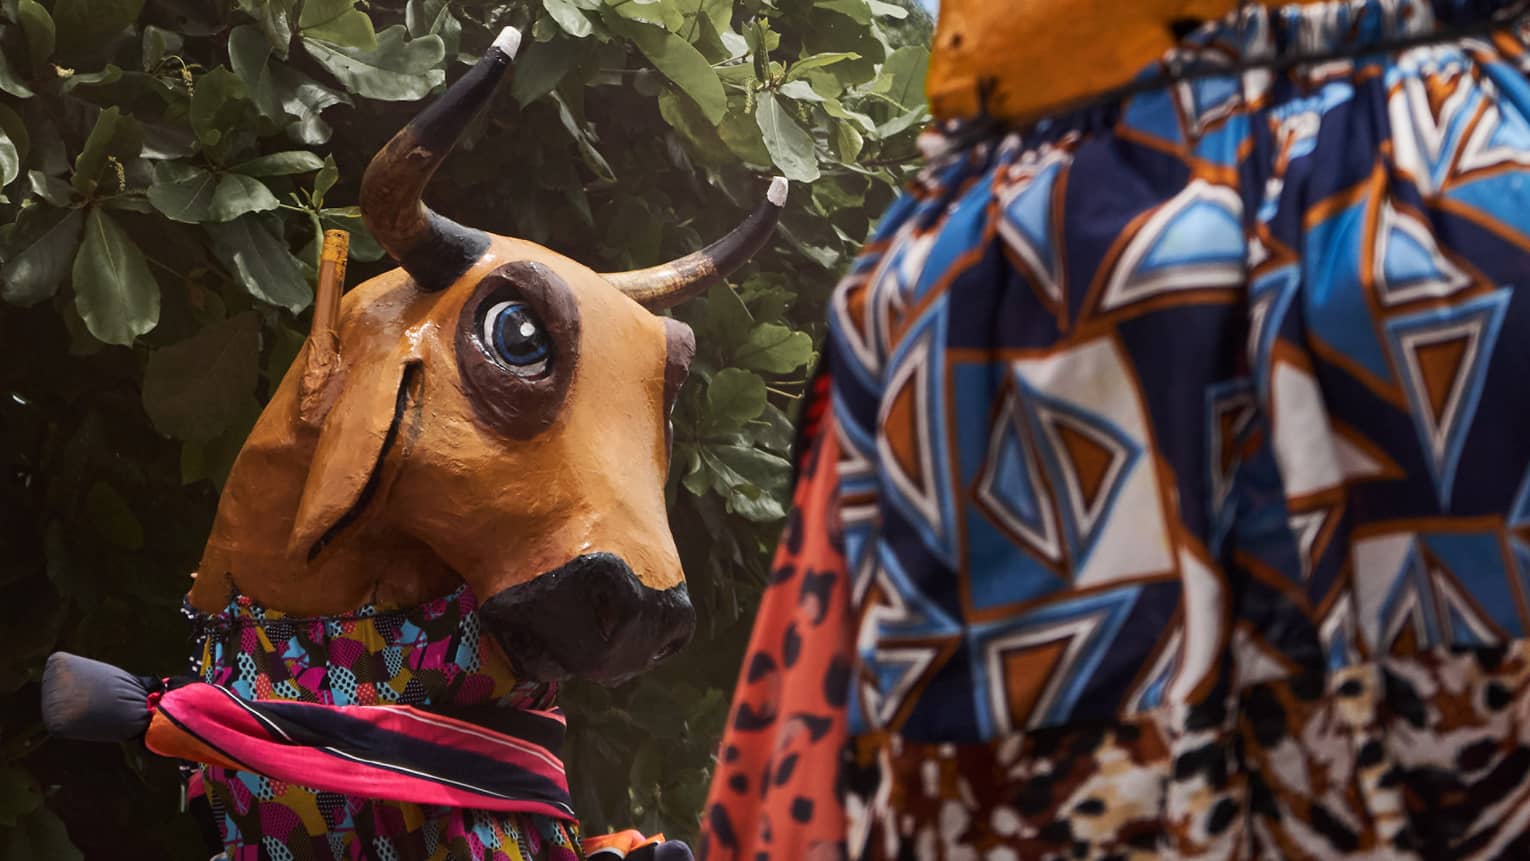 Person stands next to a tree wearing brightly colored patterned clothing and a large hand-made bull mask